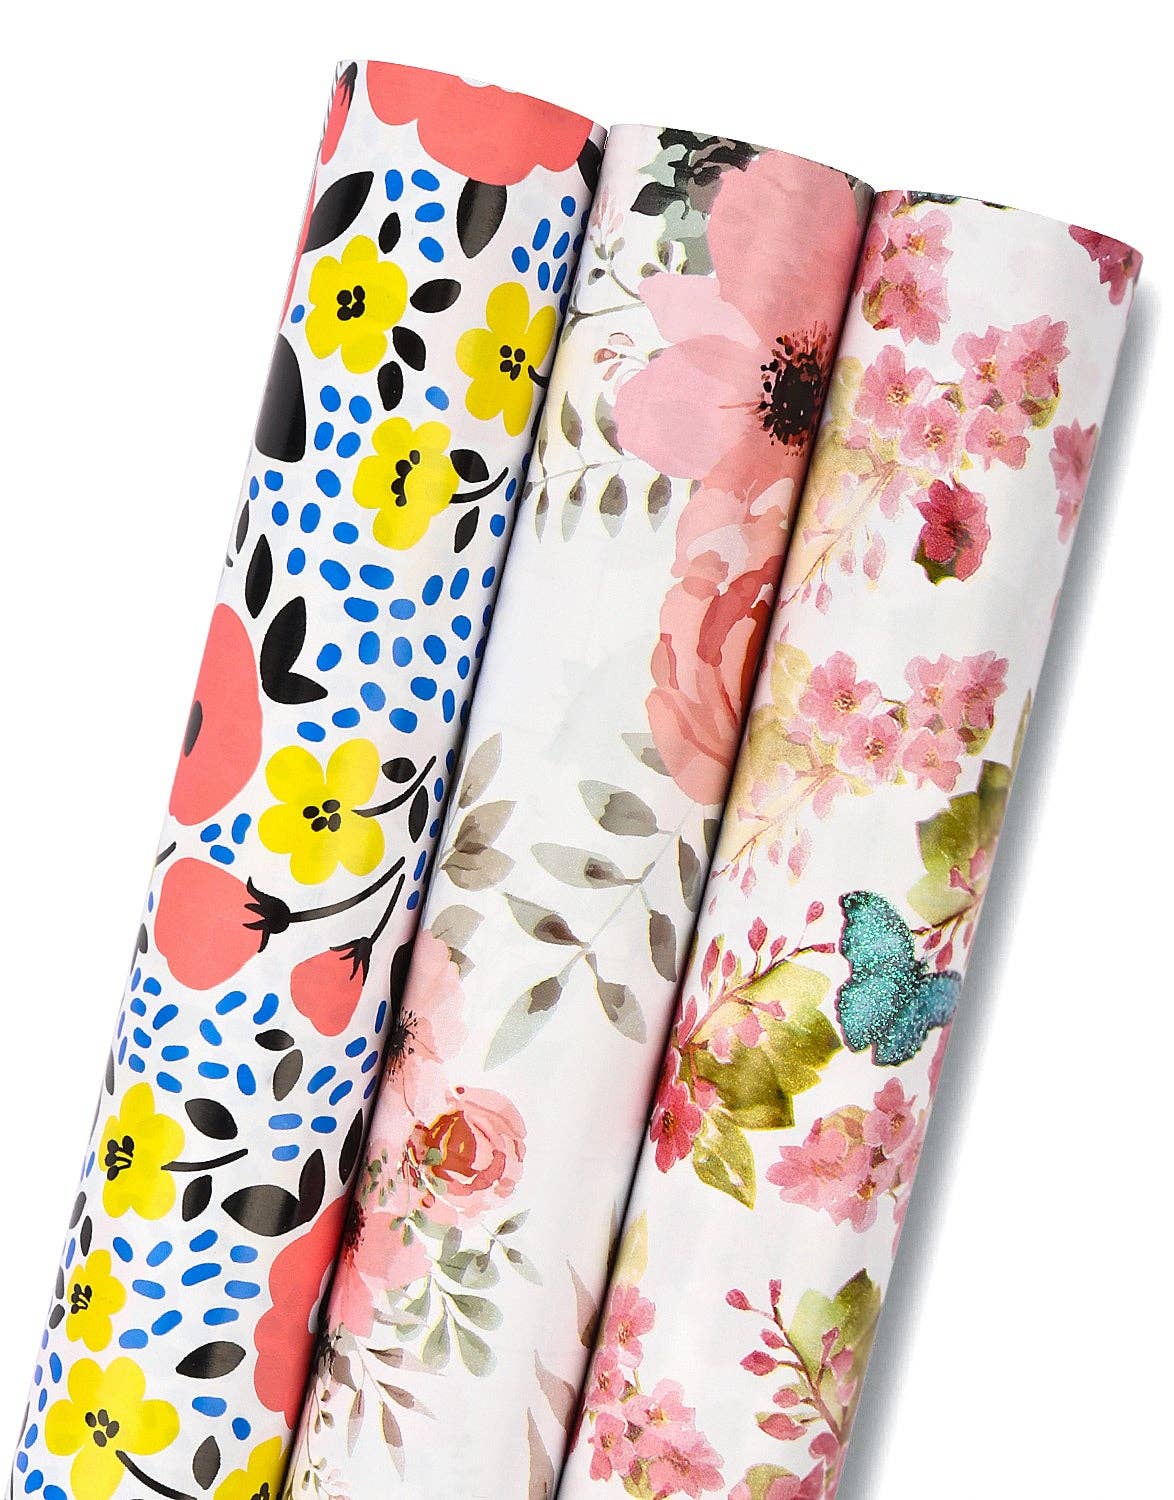 Birthday Mini Wrapping Paper 3 Roll Bundle - Pink Floral Design - 17" x 120"/Roll (42.3 Sq Ft Total)